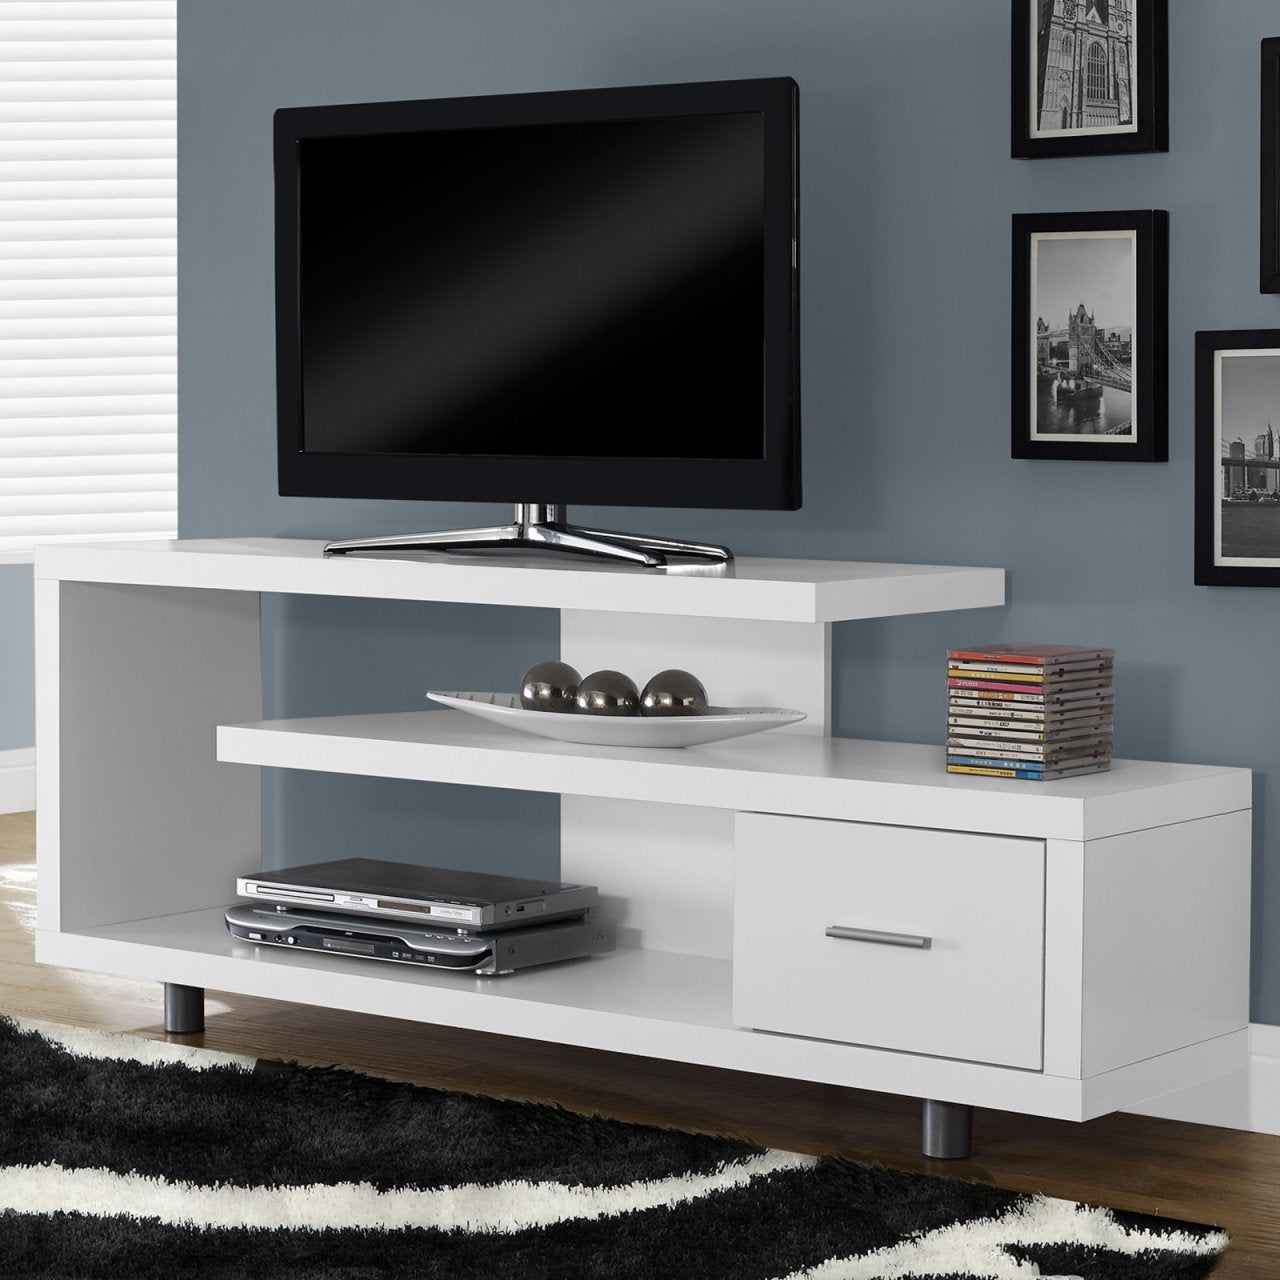 Living Room > TV Stands And Entertainment Centers - White Modern TV Stand - Fits Up To 60-inch Flat Screen TV